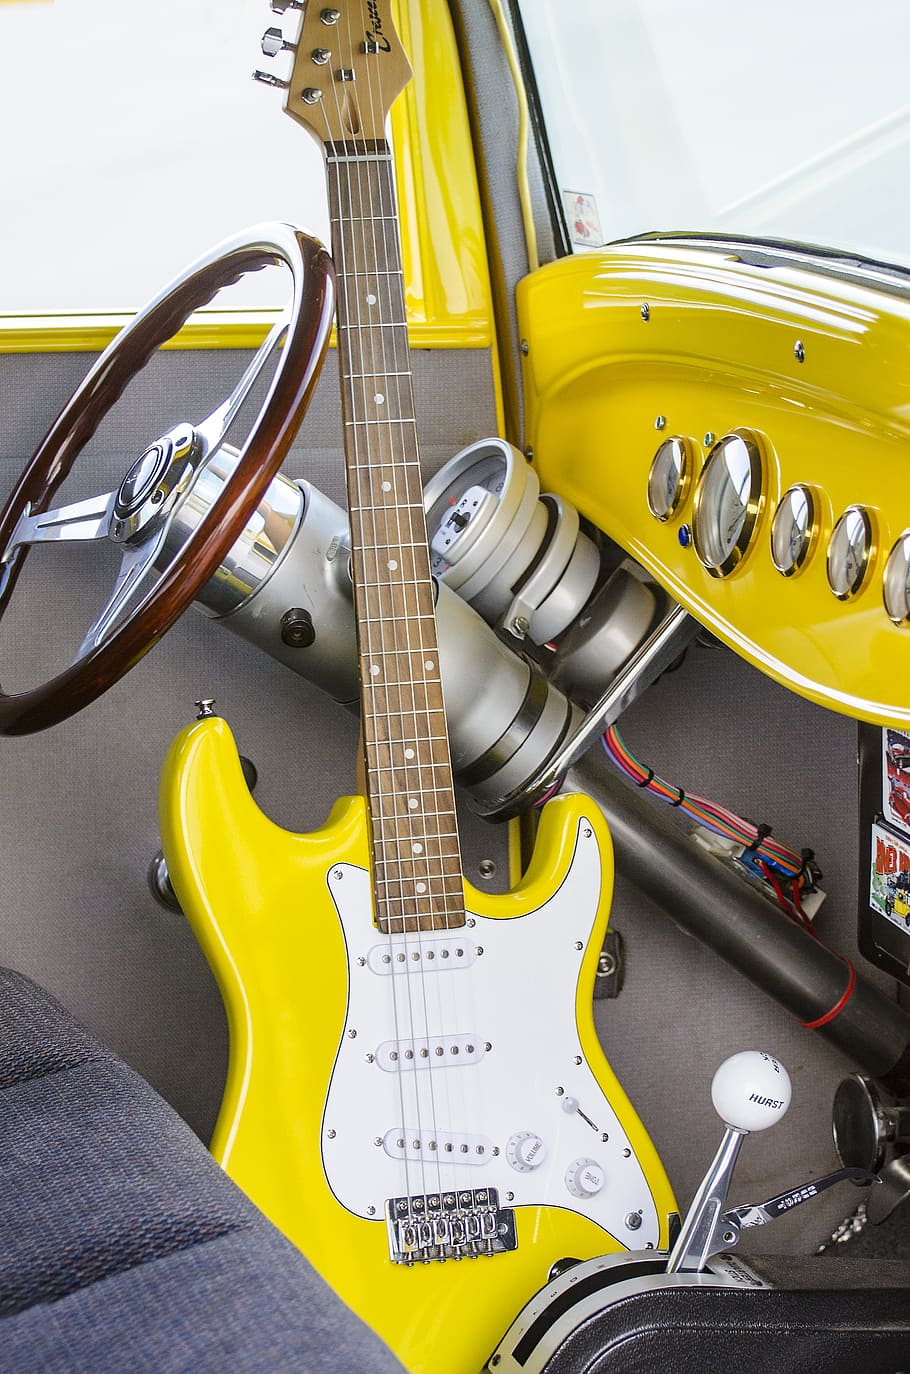 yellow electric guitar in yellow and gray interior car, steering wheel